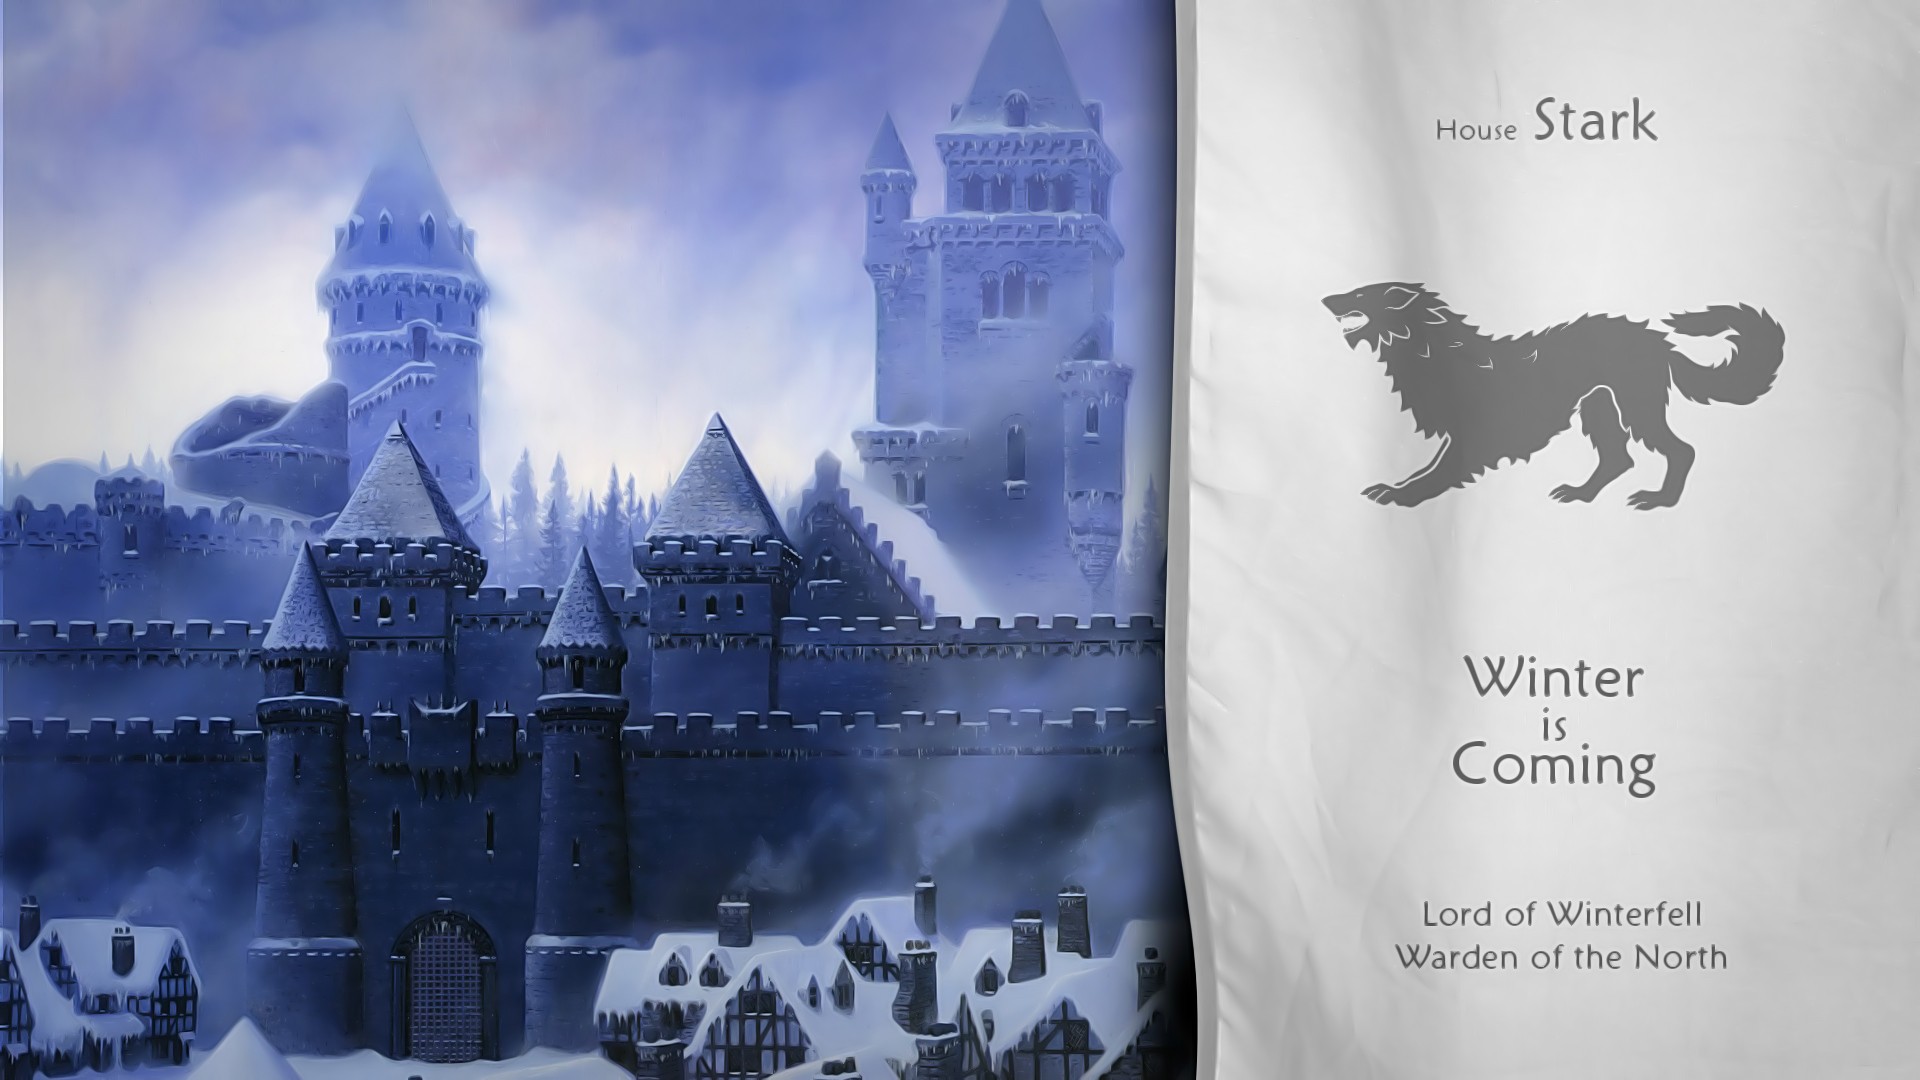 General 1920x1080 Game of Thrones castle Winterfell House Stark TV series